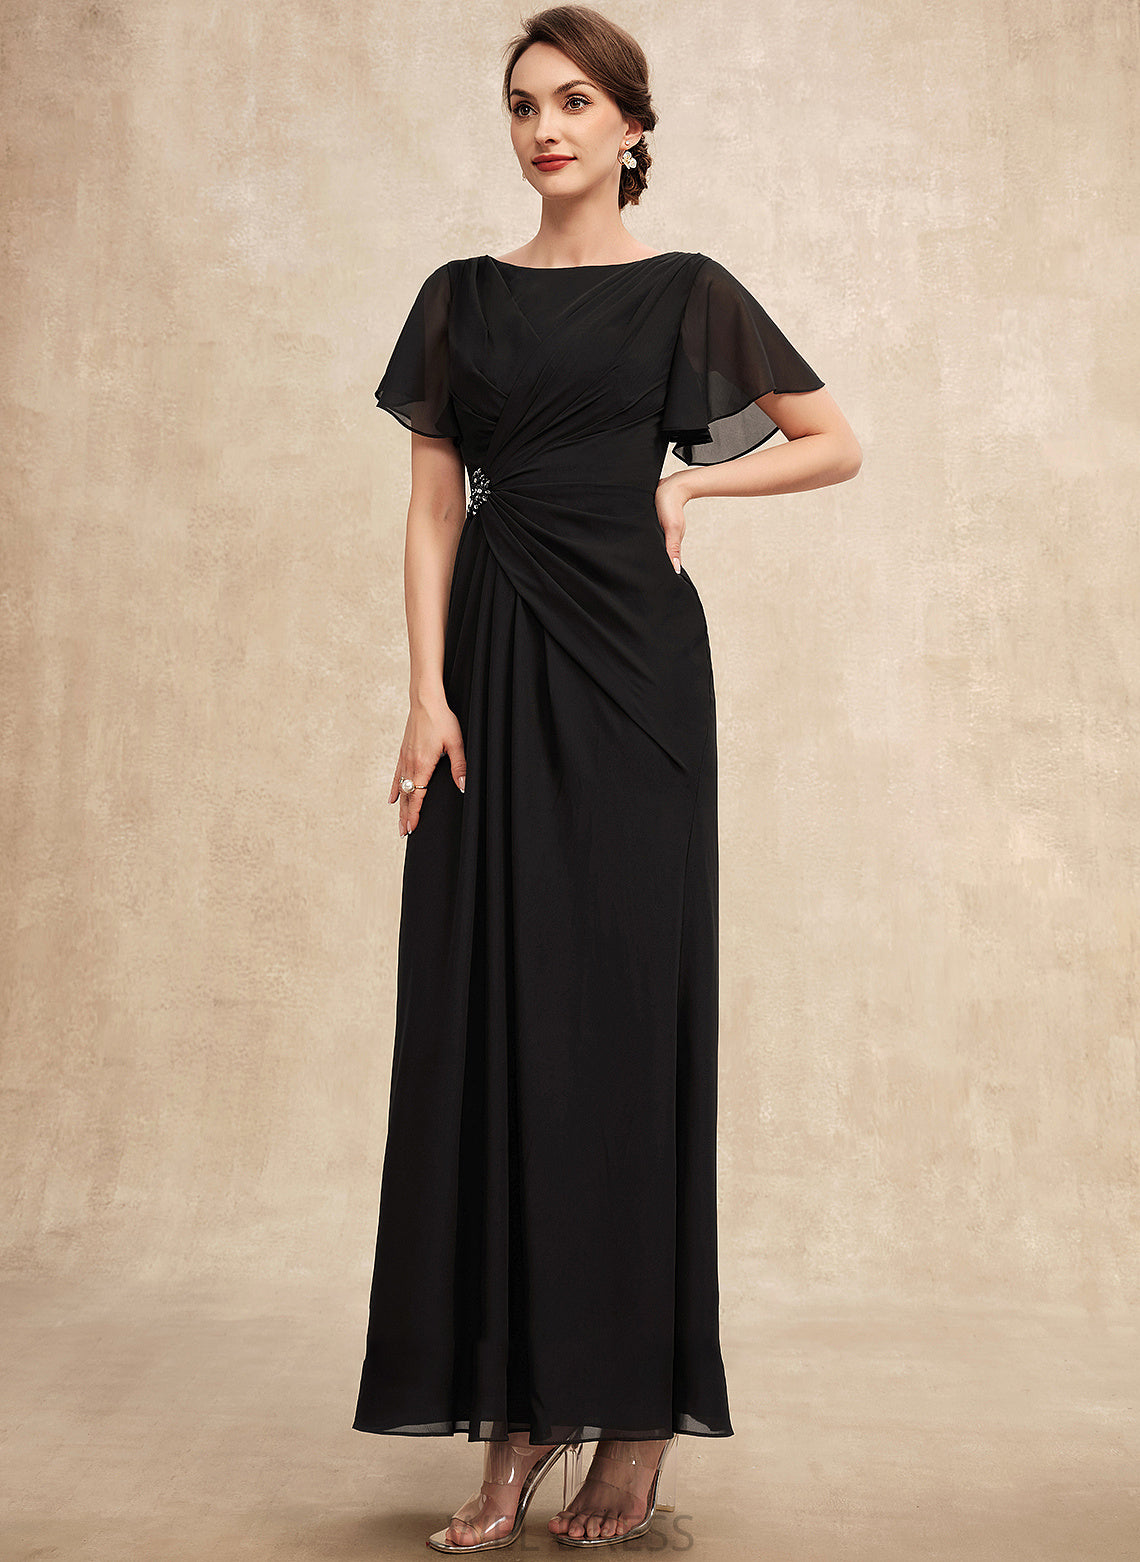 the Beading Scoop Ruffle Mother of the Bride Dresses Mother Dress Ankle-Length A-Line of Allison Chiffon With Neck Bride